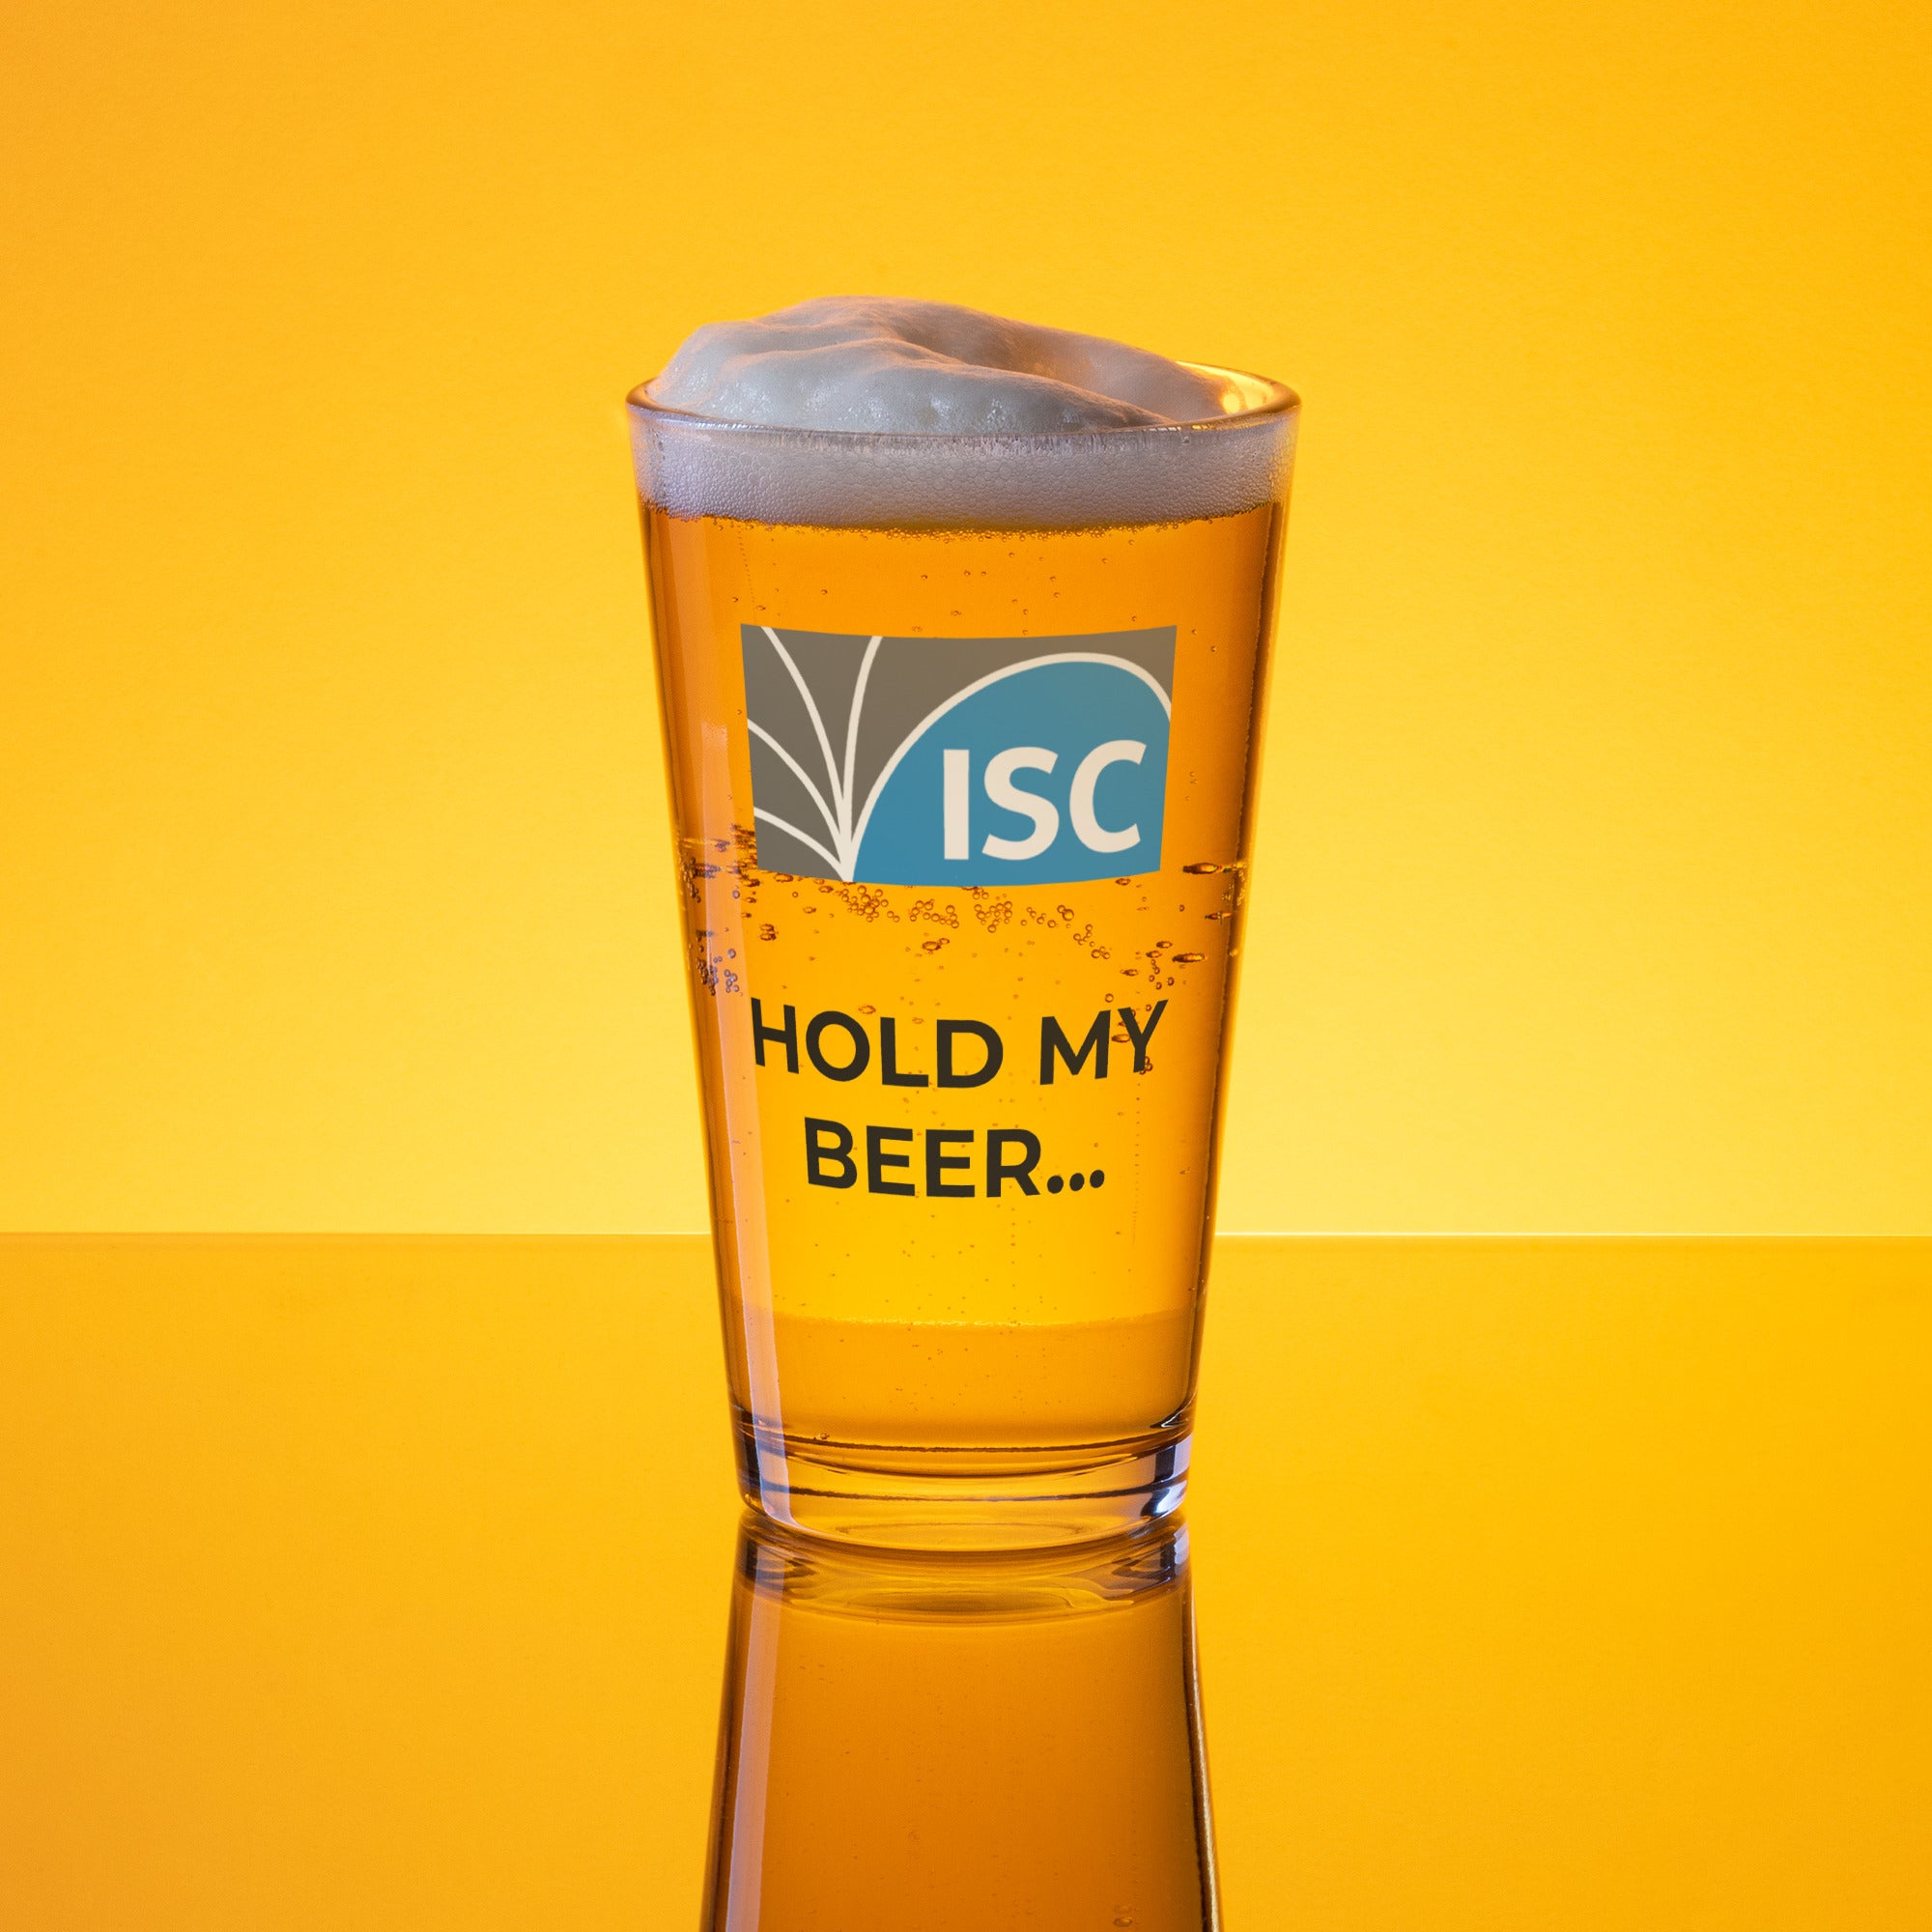 ISC "Hold My Beer" glass